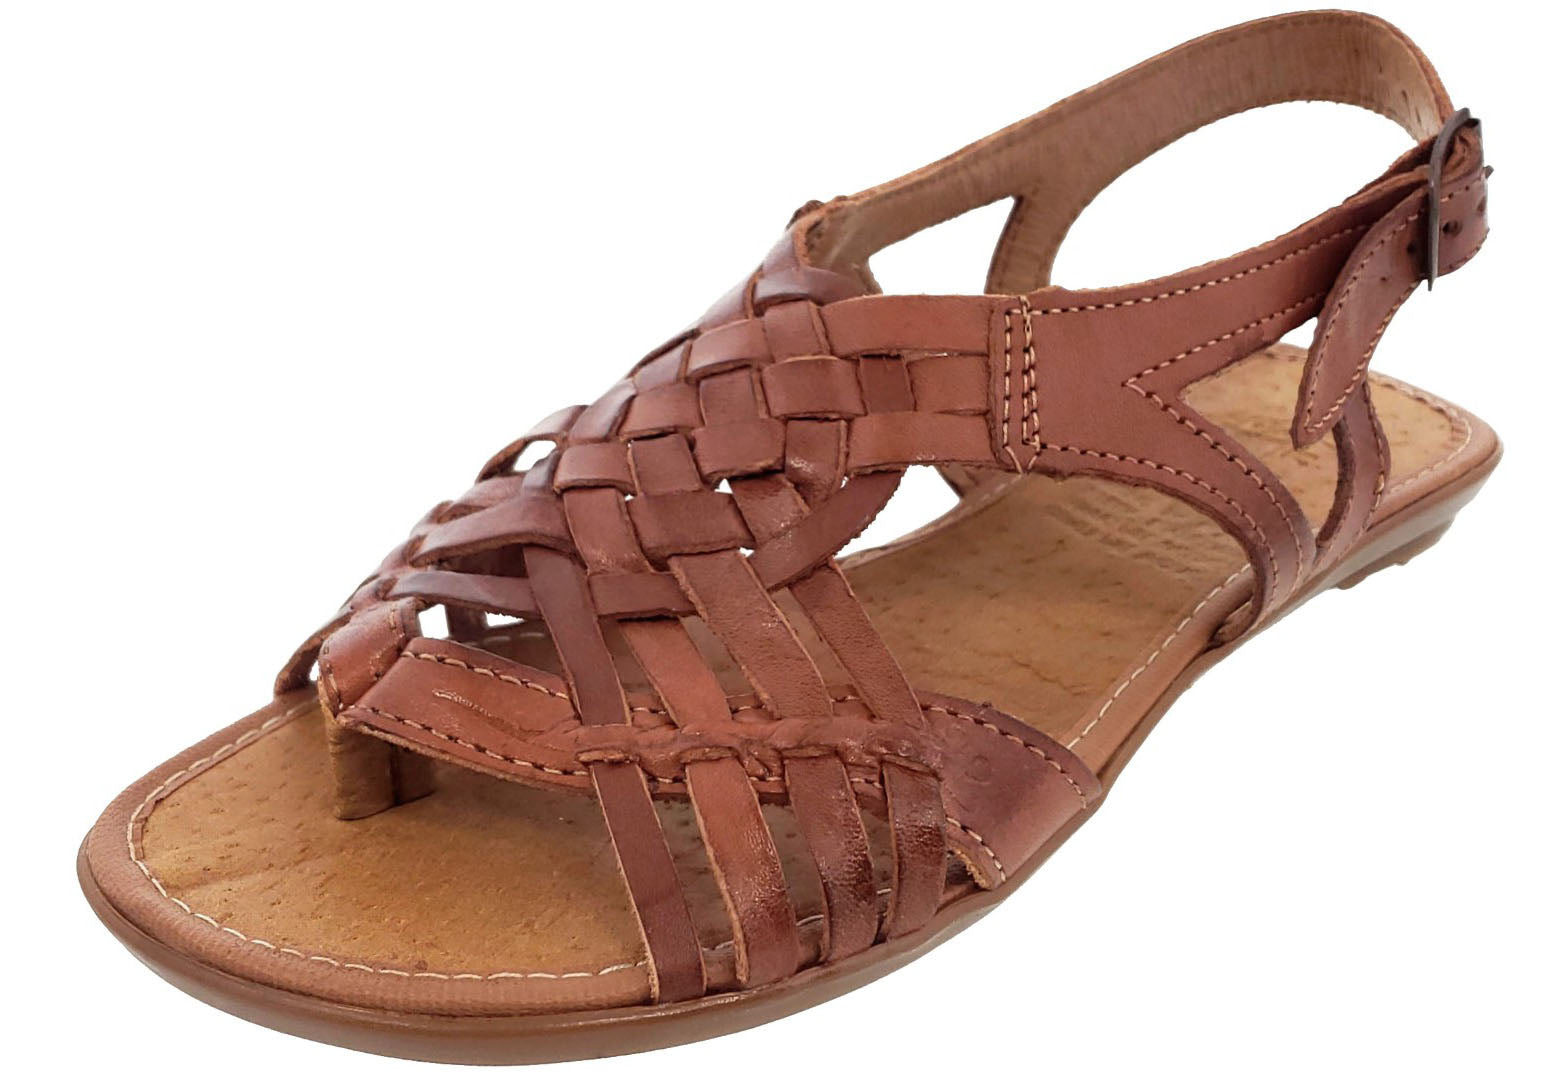 Ladies Summer Sandals | Genuine Leather | Made in Italy - Aliverti  (LO20602CUO)